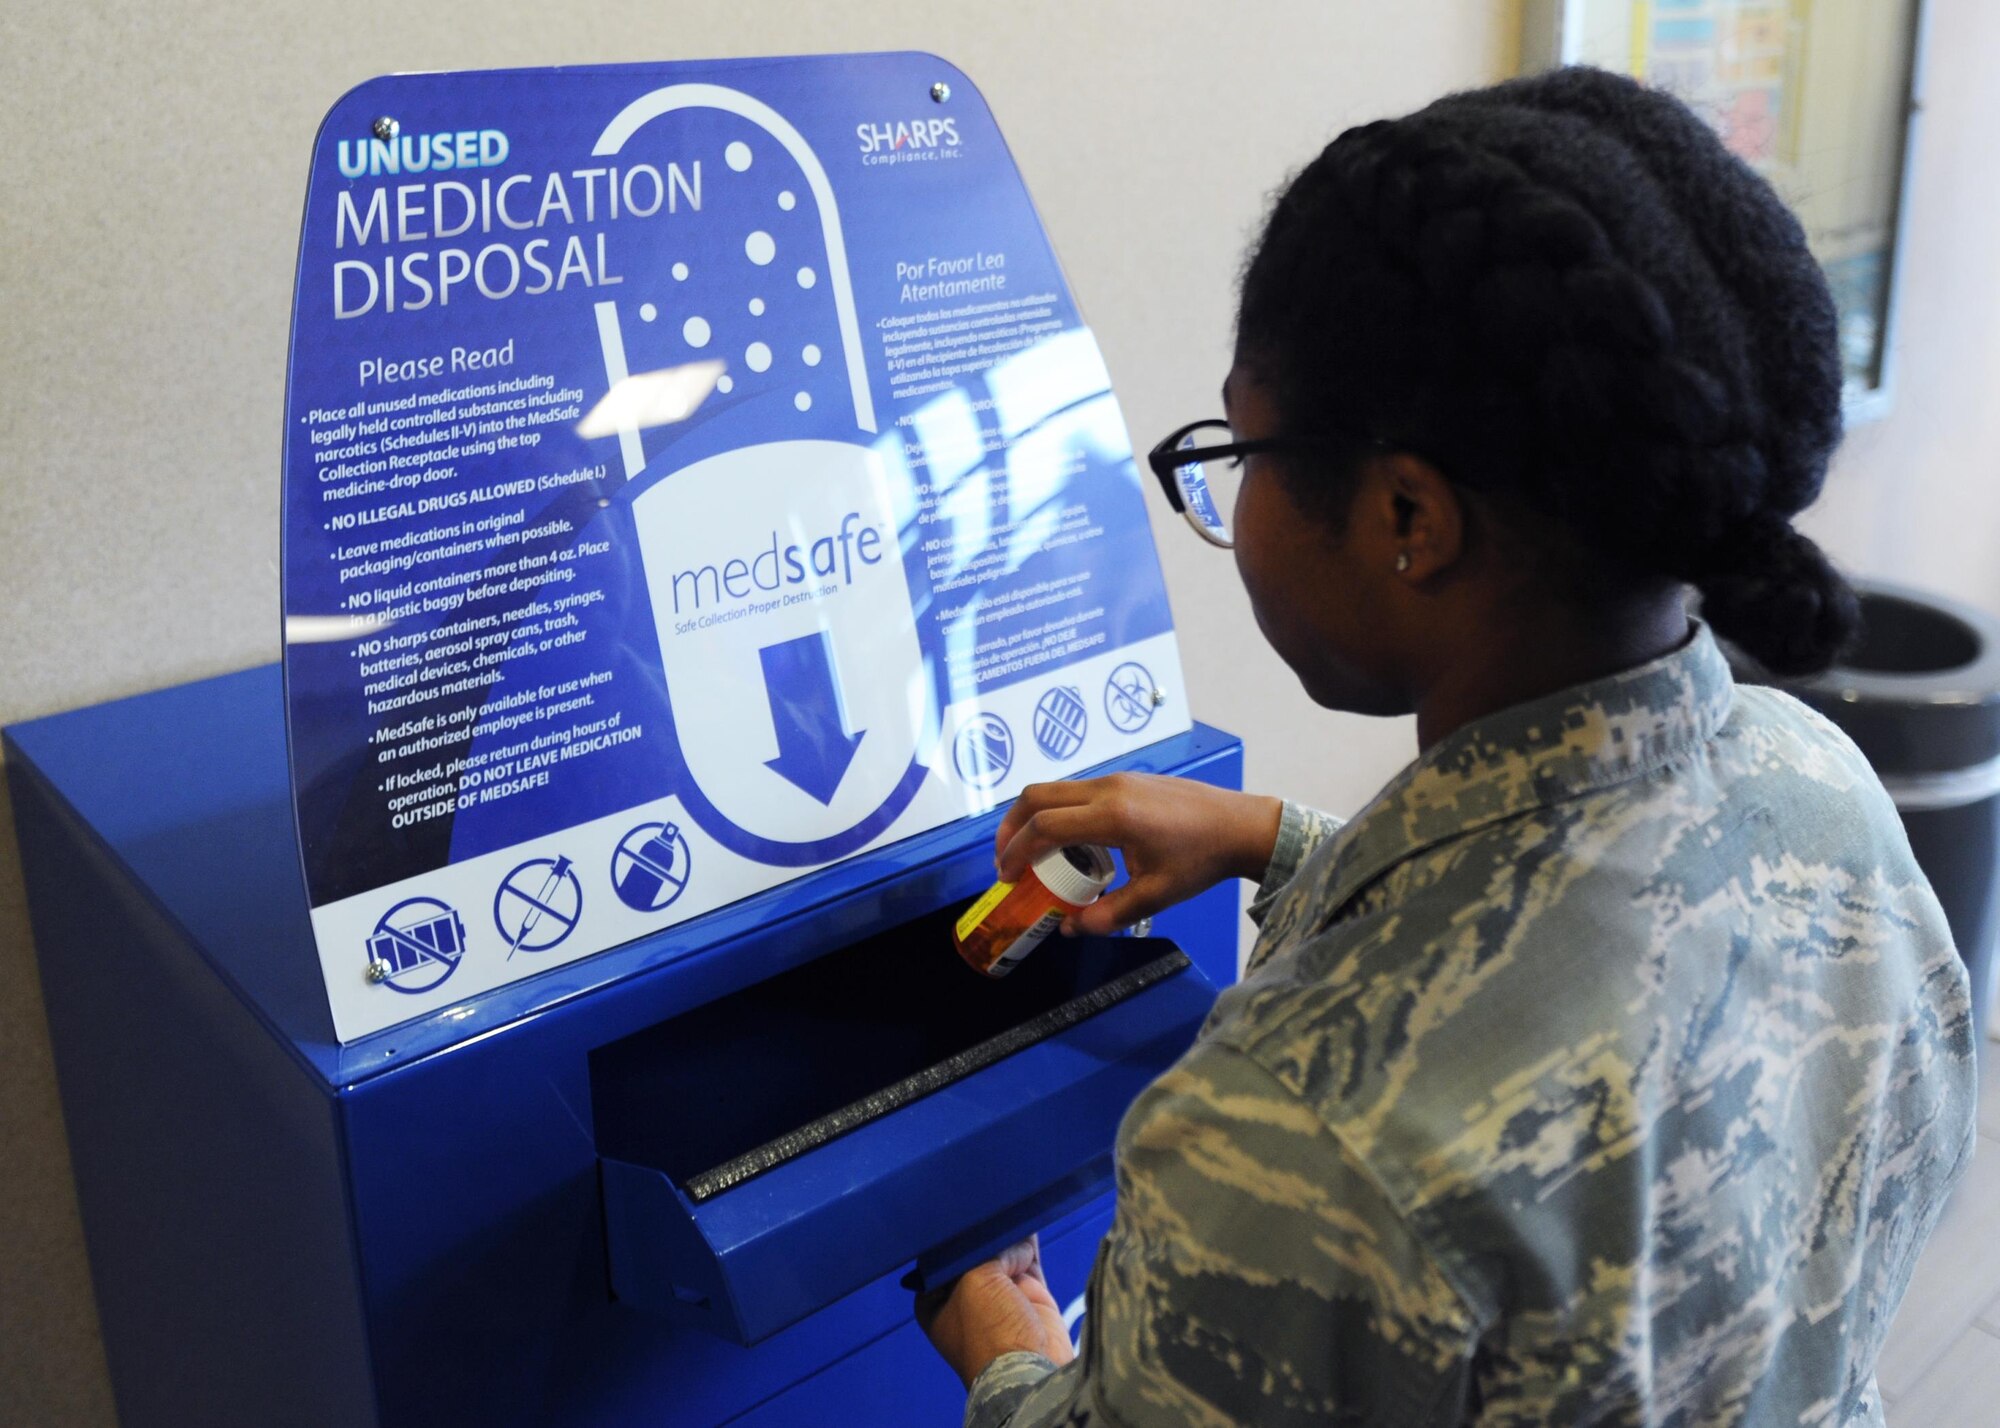 U.S. Air Force Airman 1st Class Darrielle Chark, 19th Medical Group pharmacy technician, properly disposes of personal medication in the medication disposal box Jan. 12, 2017, at the 19th MDG pharmacy on Little Rock Air Force Base, Ark. The disposal box is available 7:30 a.m. to 4:30 p.m. Monday through Friday in the pharmacy lobby. (U.S. Air Force photo by Airman 1st Class Grace Nichols)